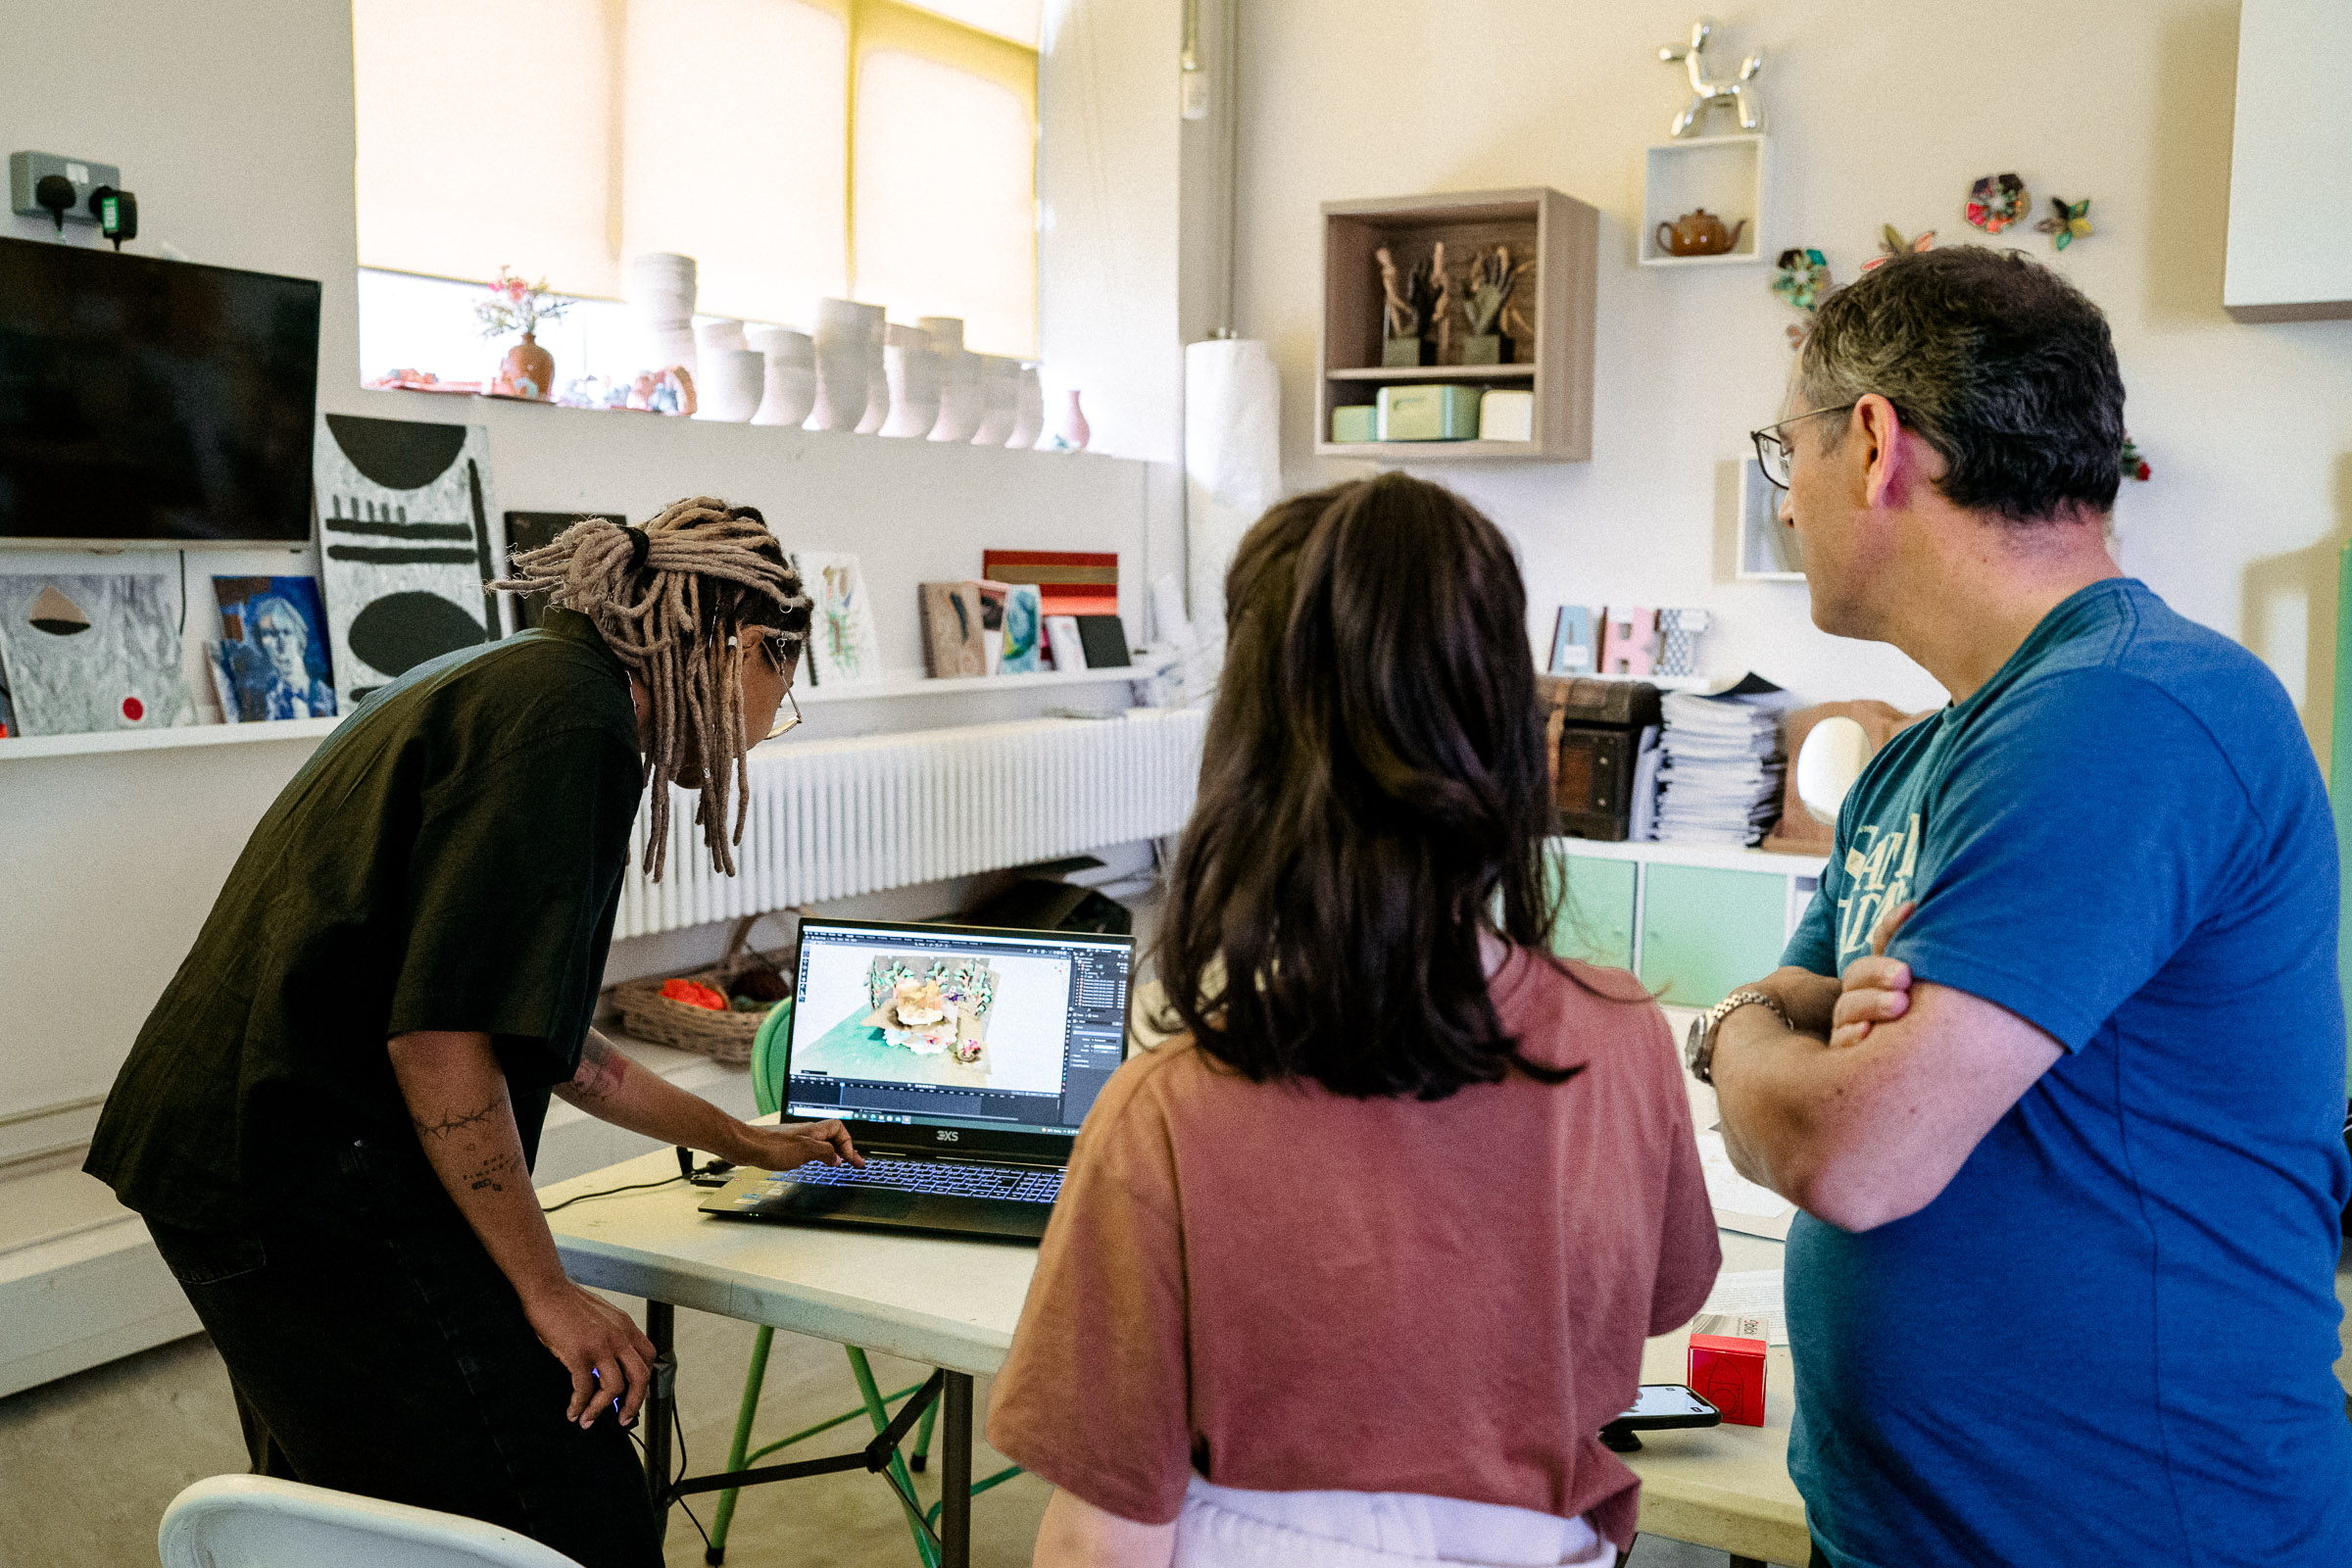 photo displaying three people looking at a laptop in a workshop space. On the left side is the artist, a black person with dreadlocs and black clothing with their hand on the keyboard showing a 3D render to the other two people, a young person with long hair and pink shirt, and their parent, in a blue shirt and short hair with their arms crossed.